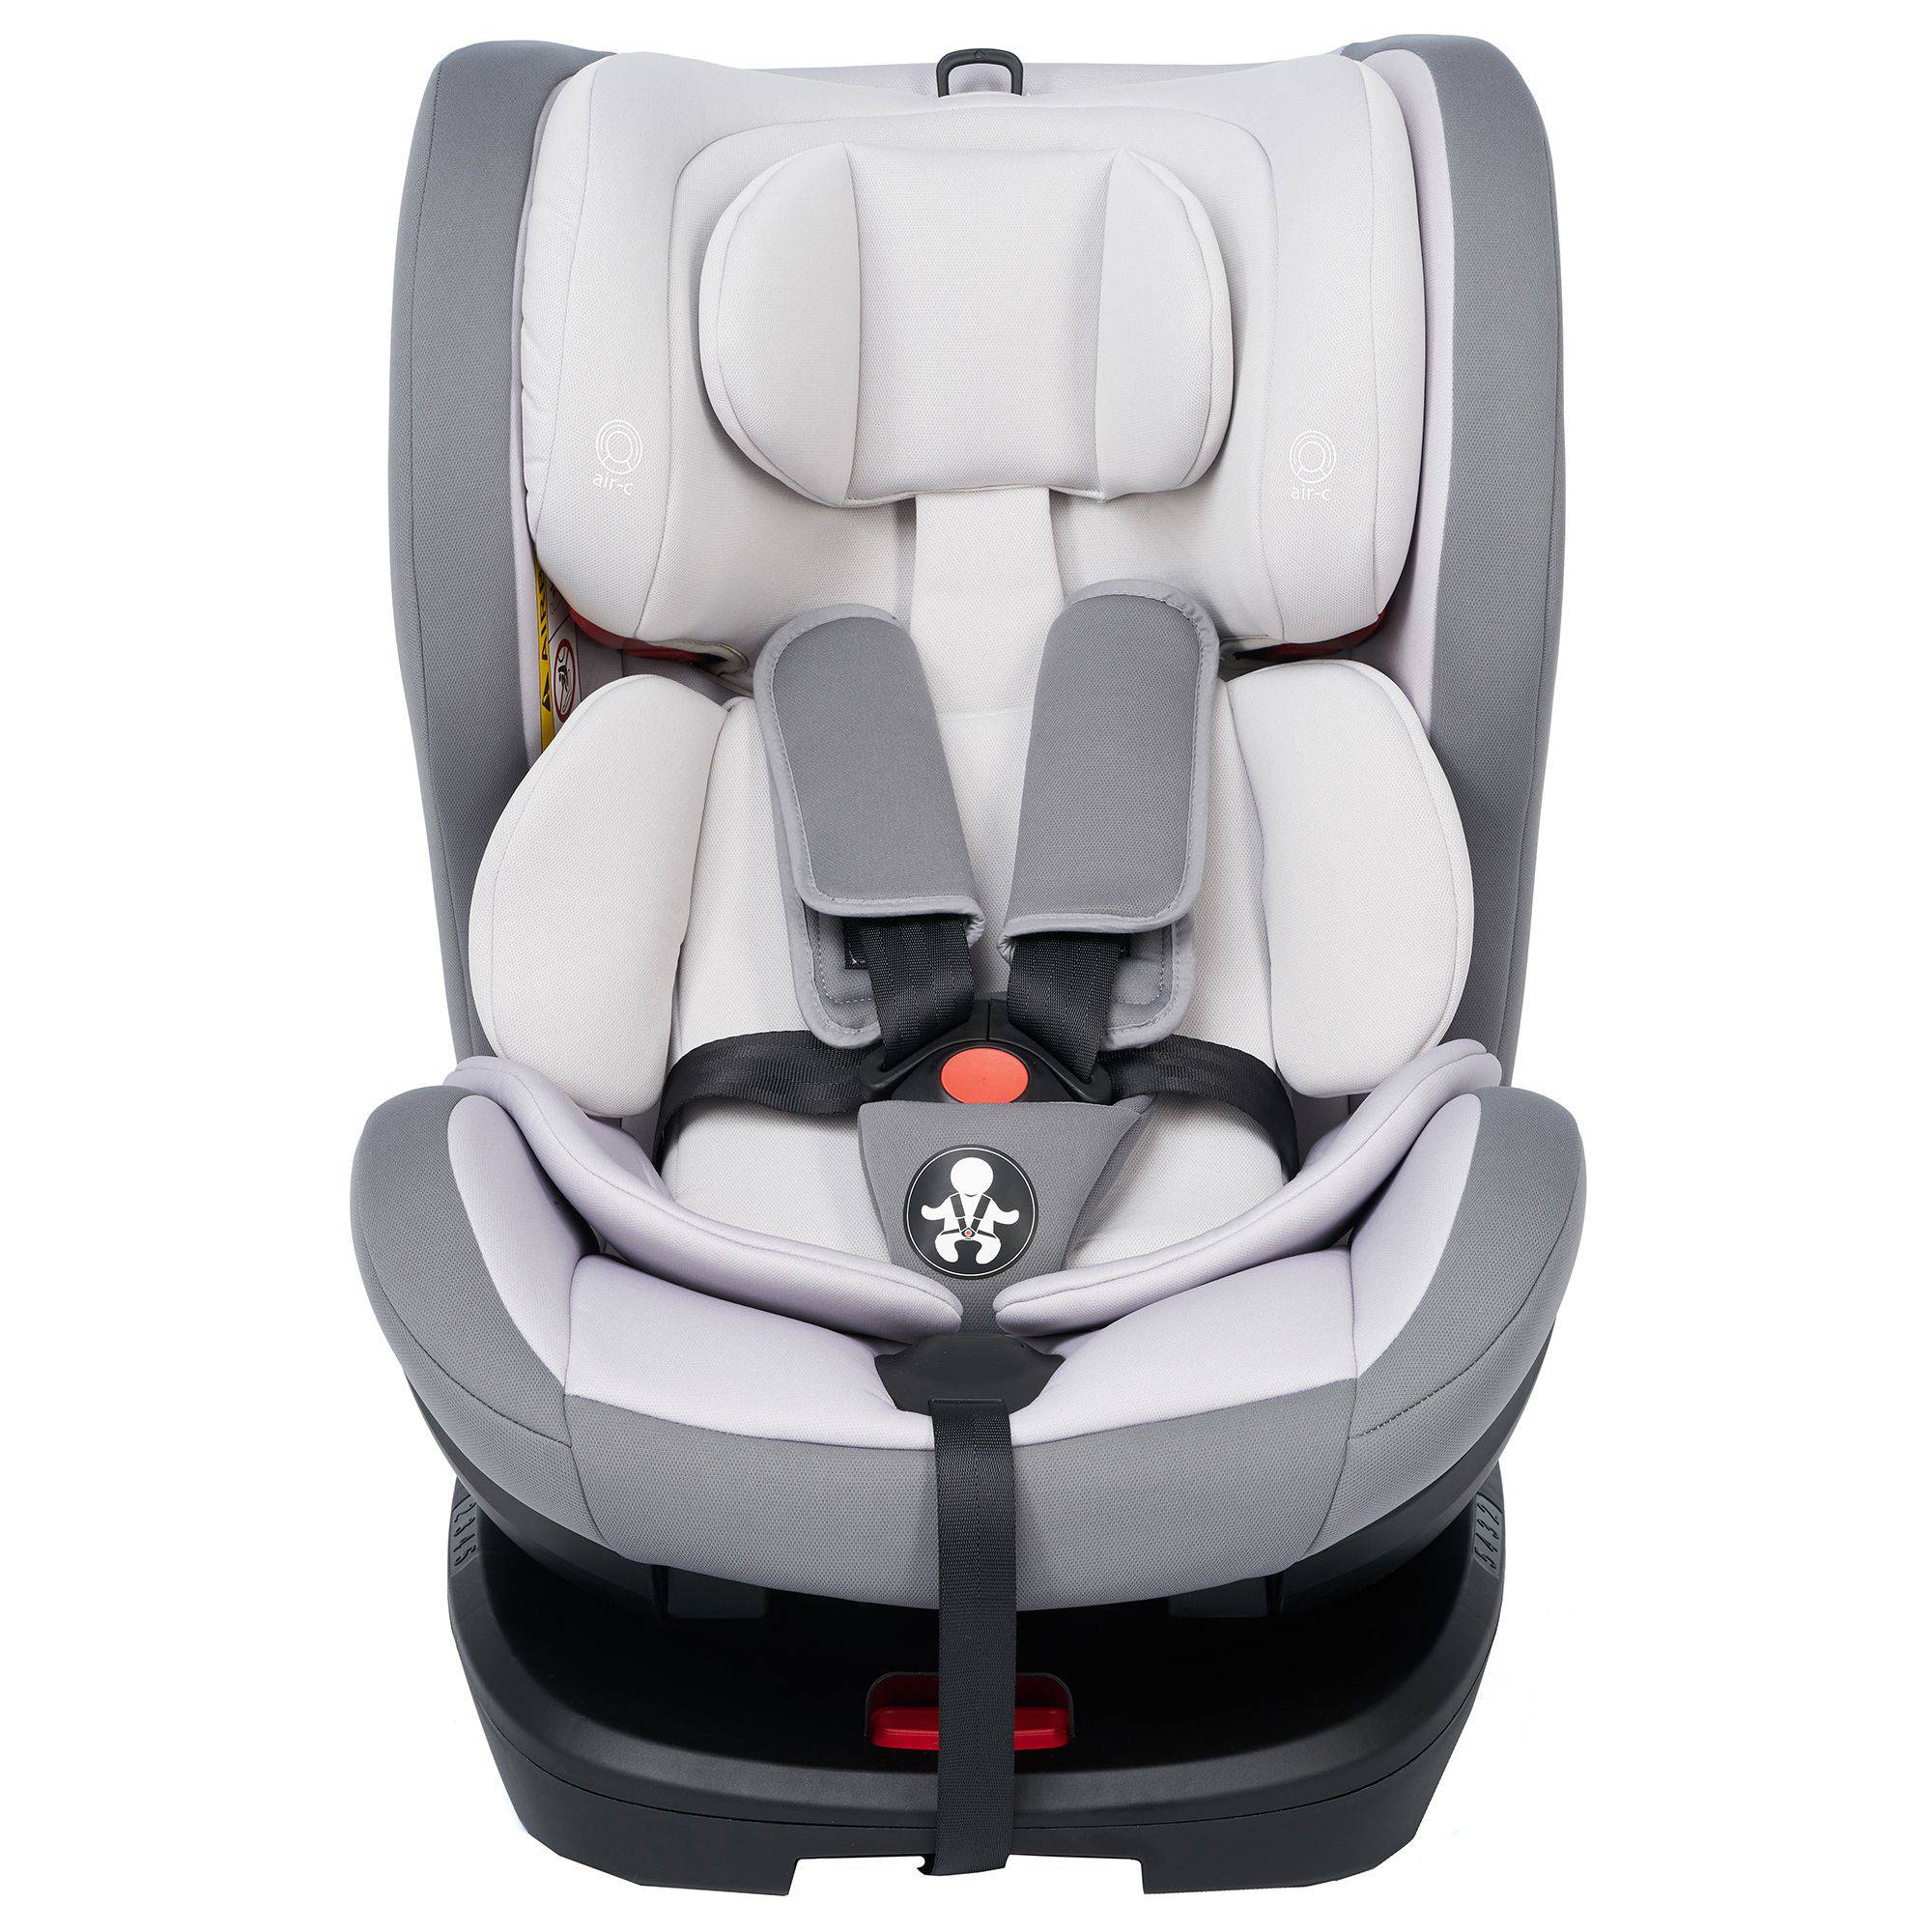 https://www.emag.ro/scaun-auto-isofix-u-grow-rotativ-0-36-kg-gri-5949088545728/pd/D983LGBBM/?X-Search-Id=baba6122afe90061f04a&X-Product-Id=56044117&X-Search-Page=1&X-Search-Position=14&X-Section=search&X-MB=0&X-Search-Action=view